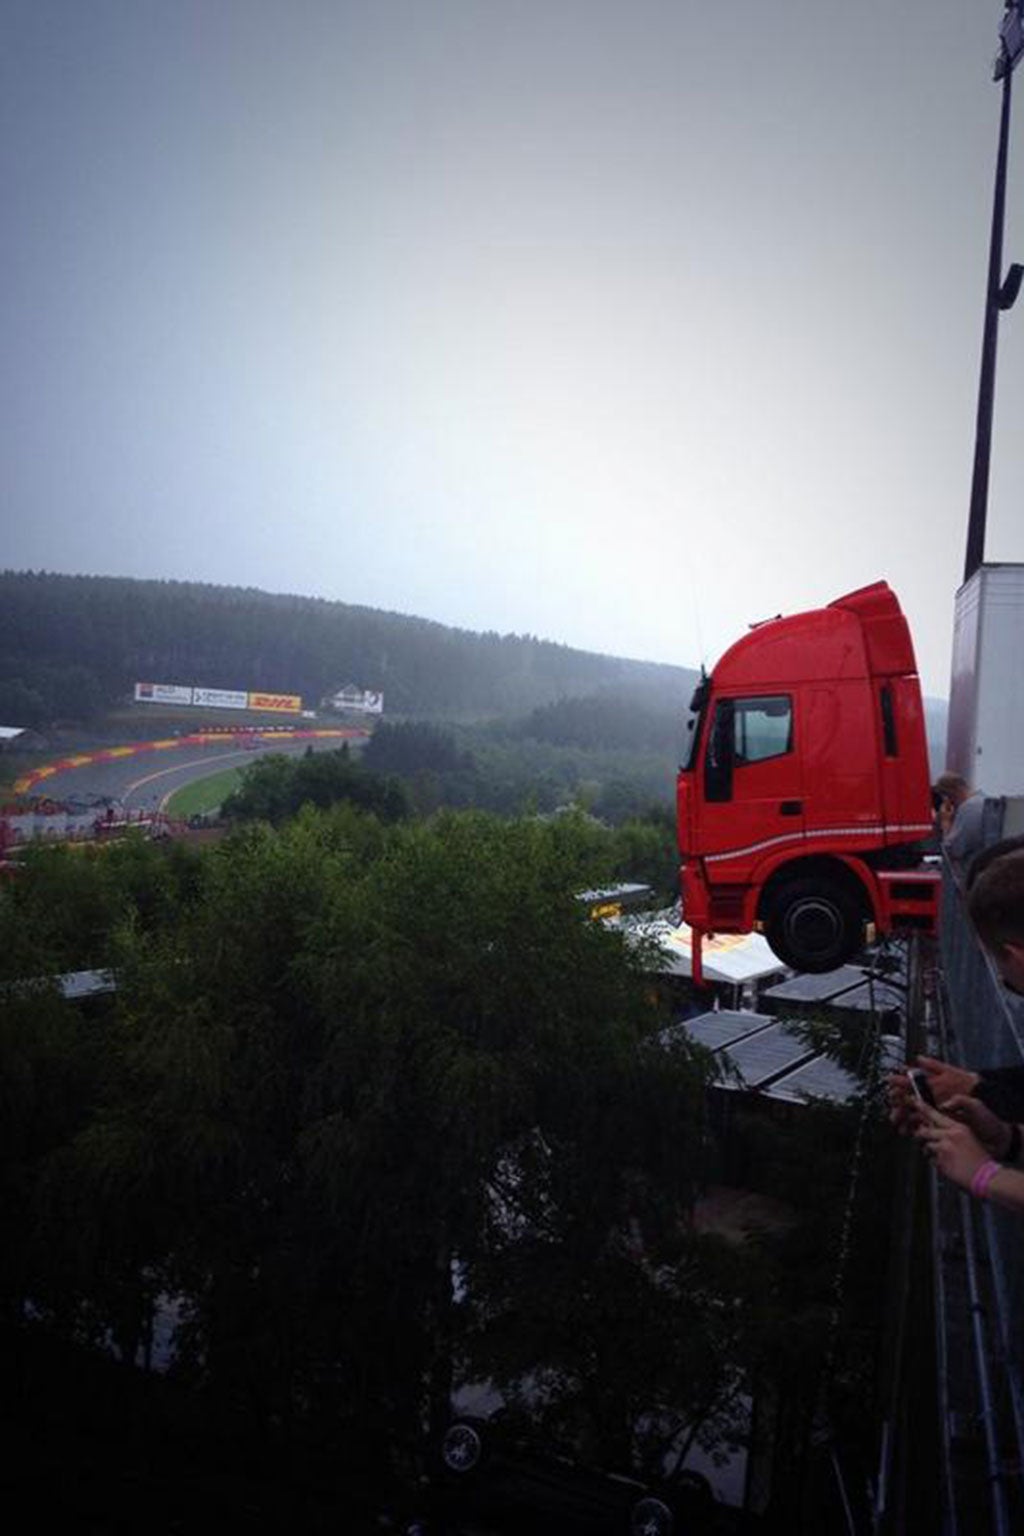 A truck hangs on the edge of a hefty drop at the Spa-Franchorchamps track